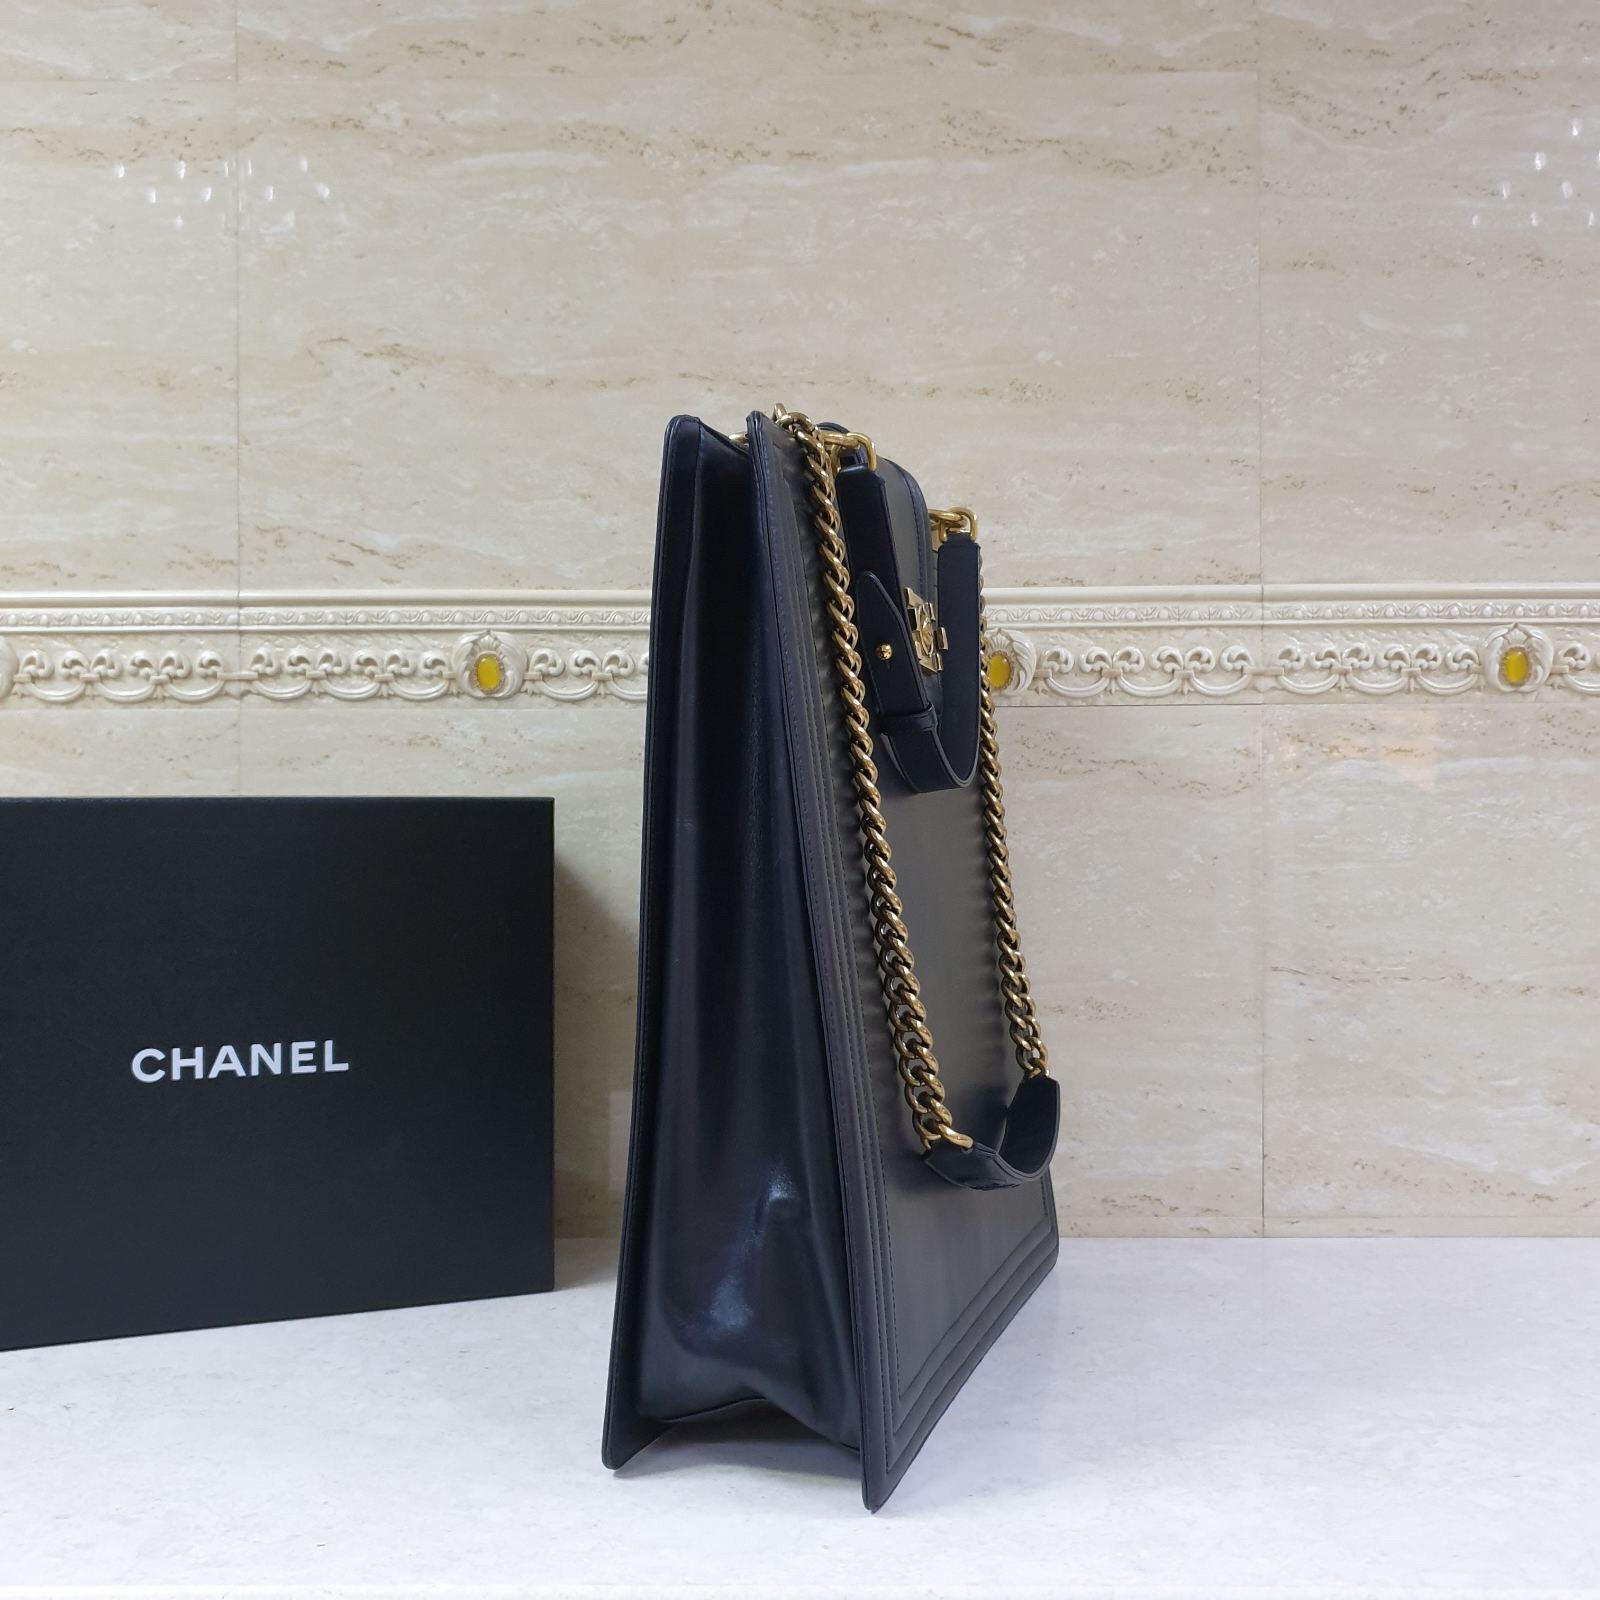 Chanel Boy North to South Black Leather Tote Bag 1